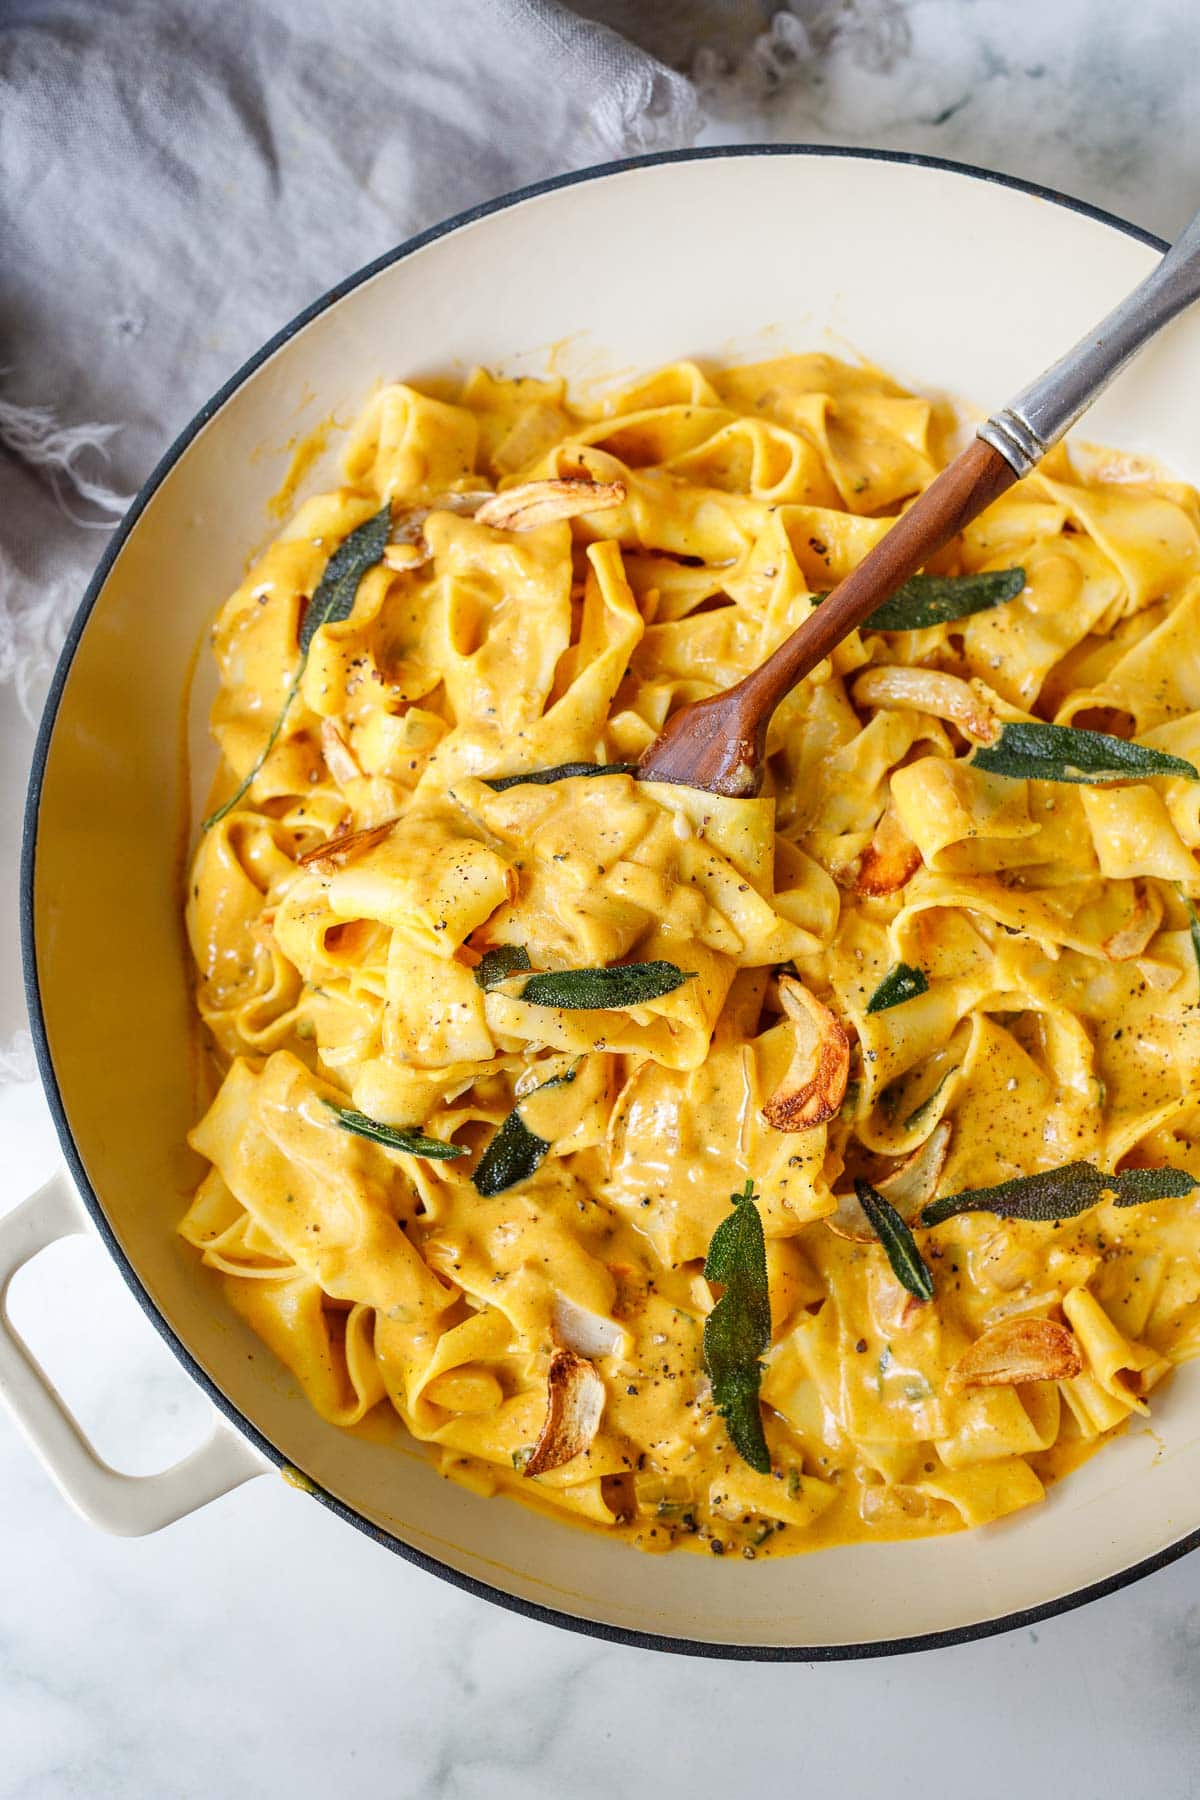 This Pumpkin Pasta recipe is made with simple ingredients in under 15 minutes. Deceptively vegan, it will soon become your new favorite!